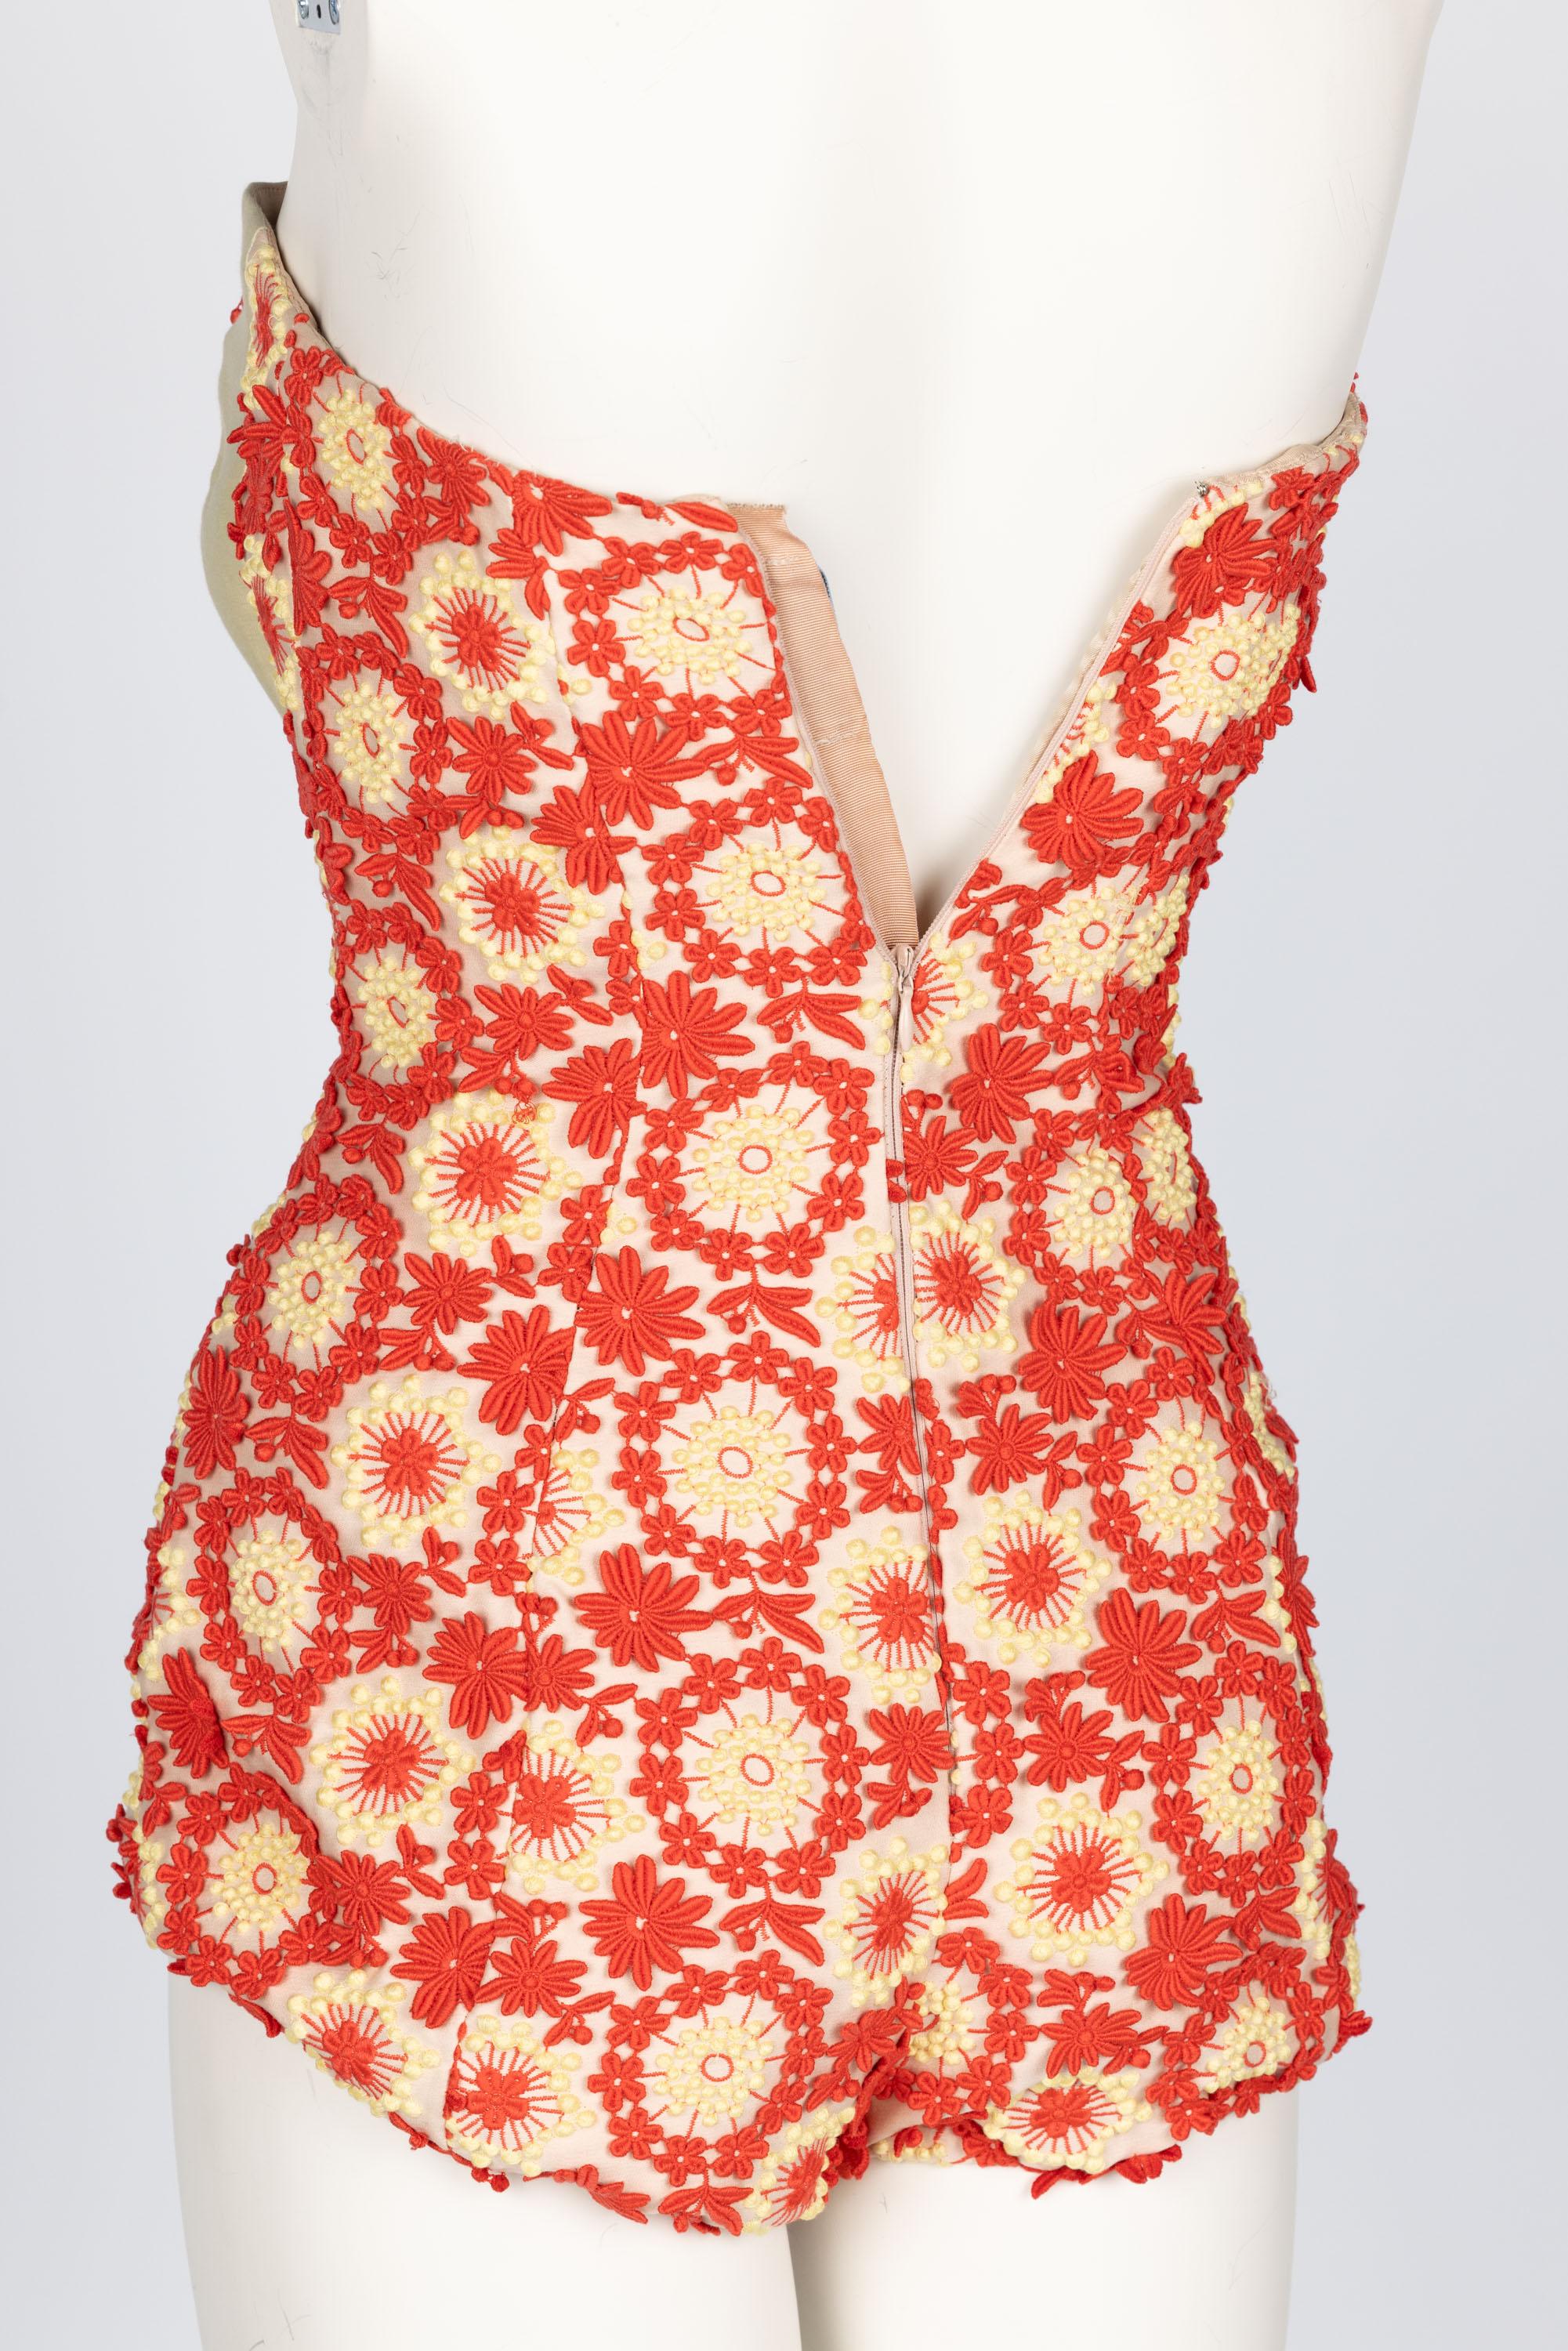 Prada Most Wanted Spring 2012 Floral Embroidered Pinup Bodysuit For Sale 1